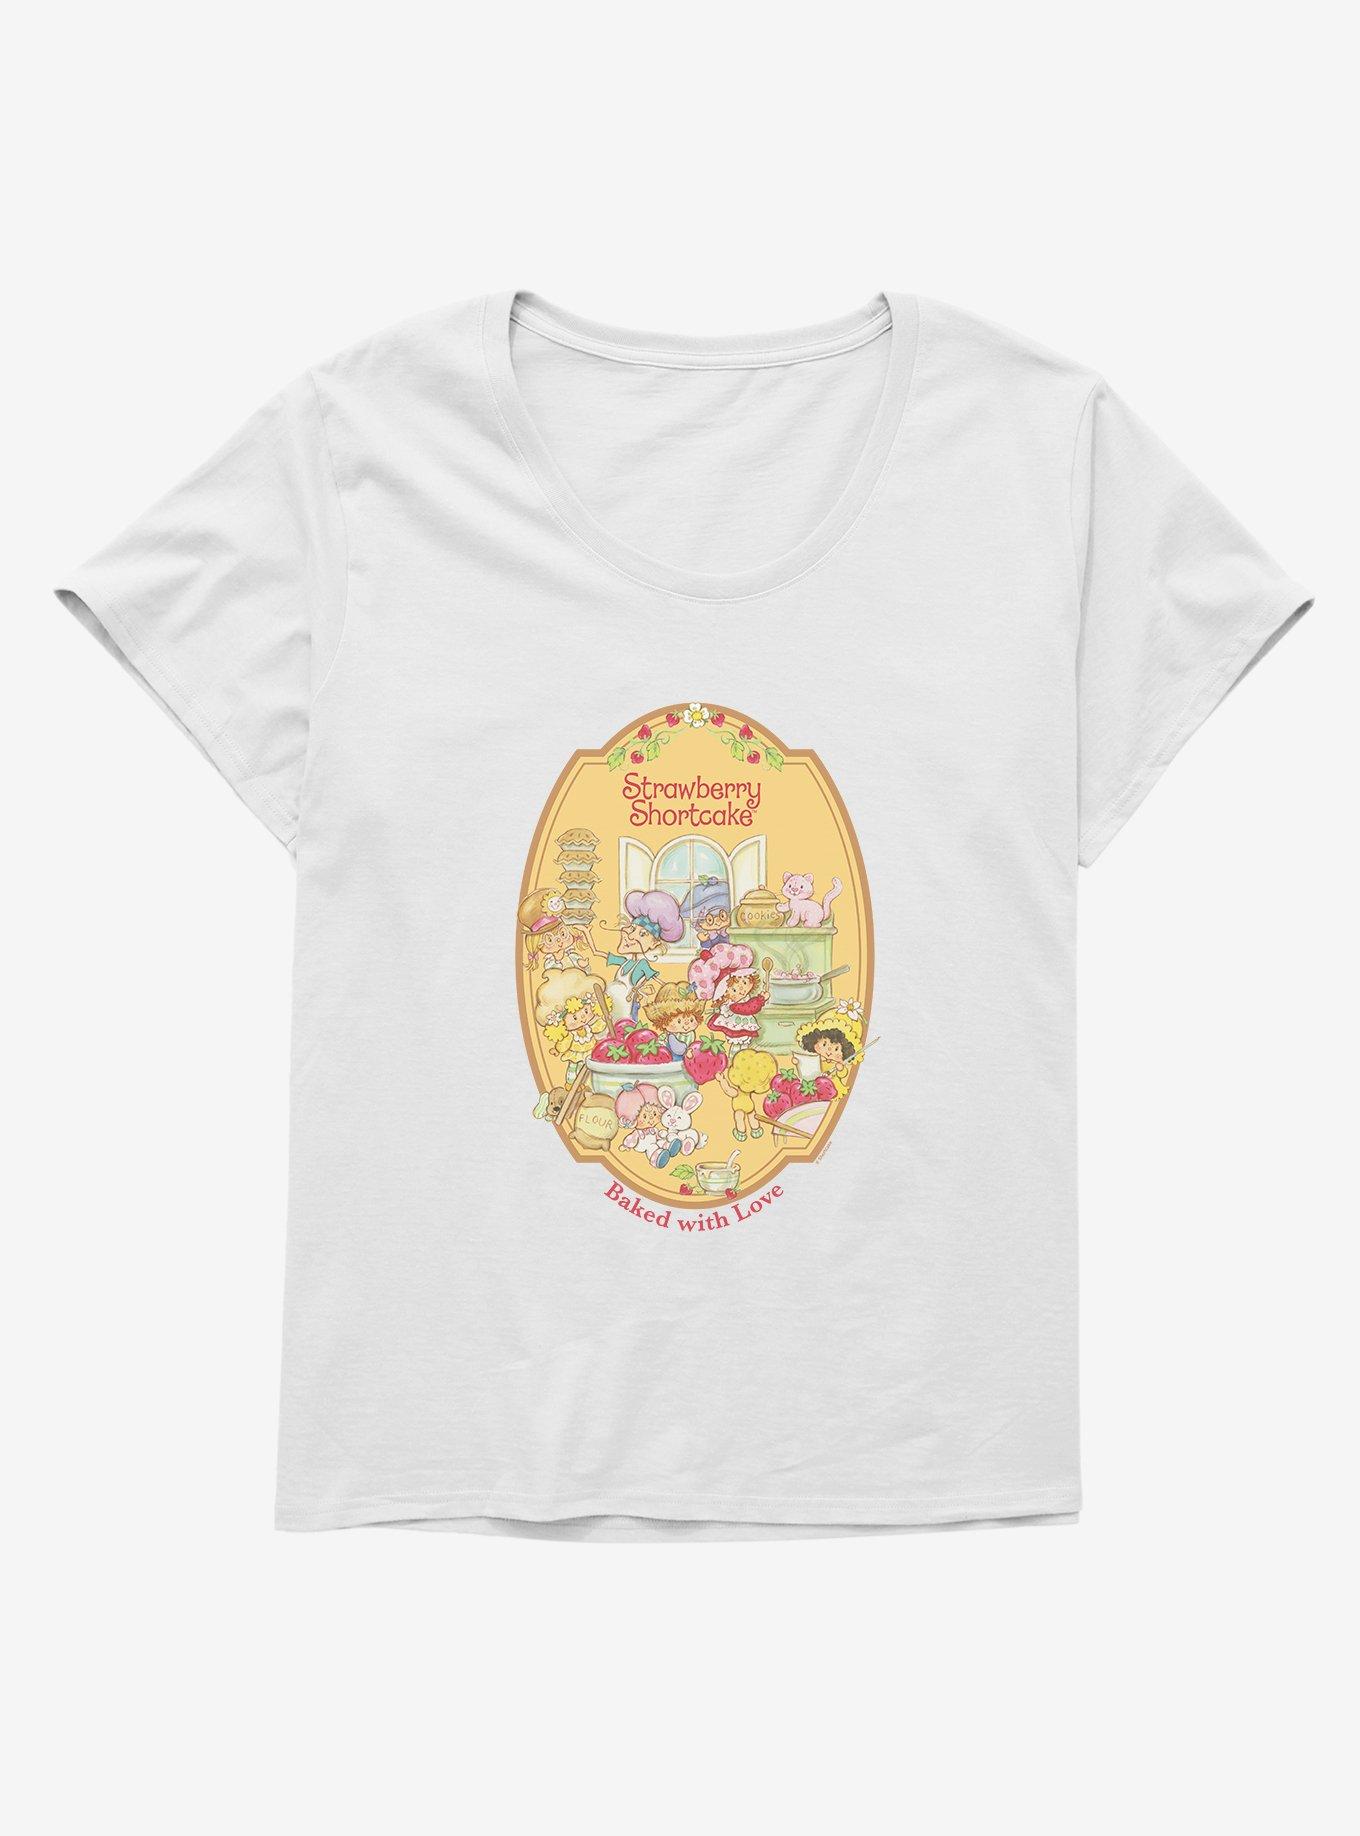 Strawberry Shortcake Baked With Love Girls T-Shirt Plus Size, WHITE, hi-res